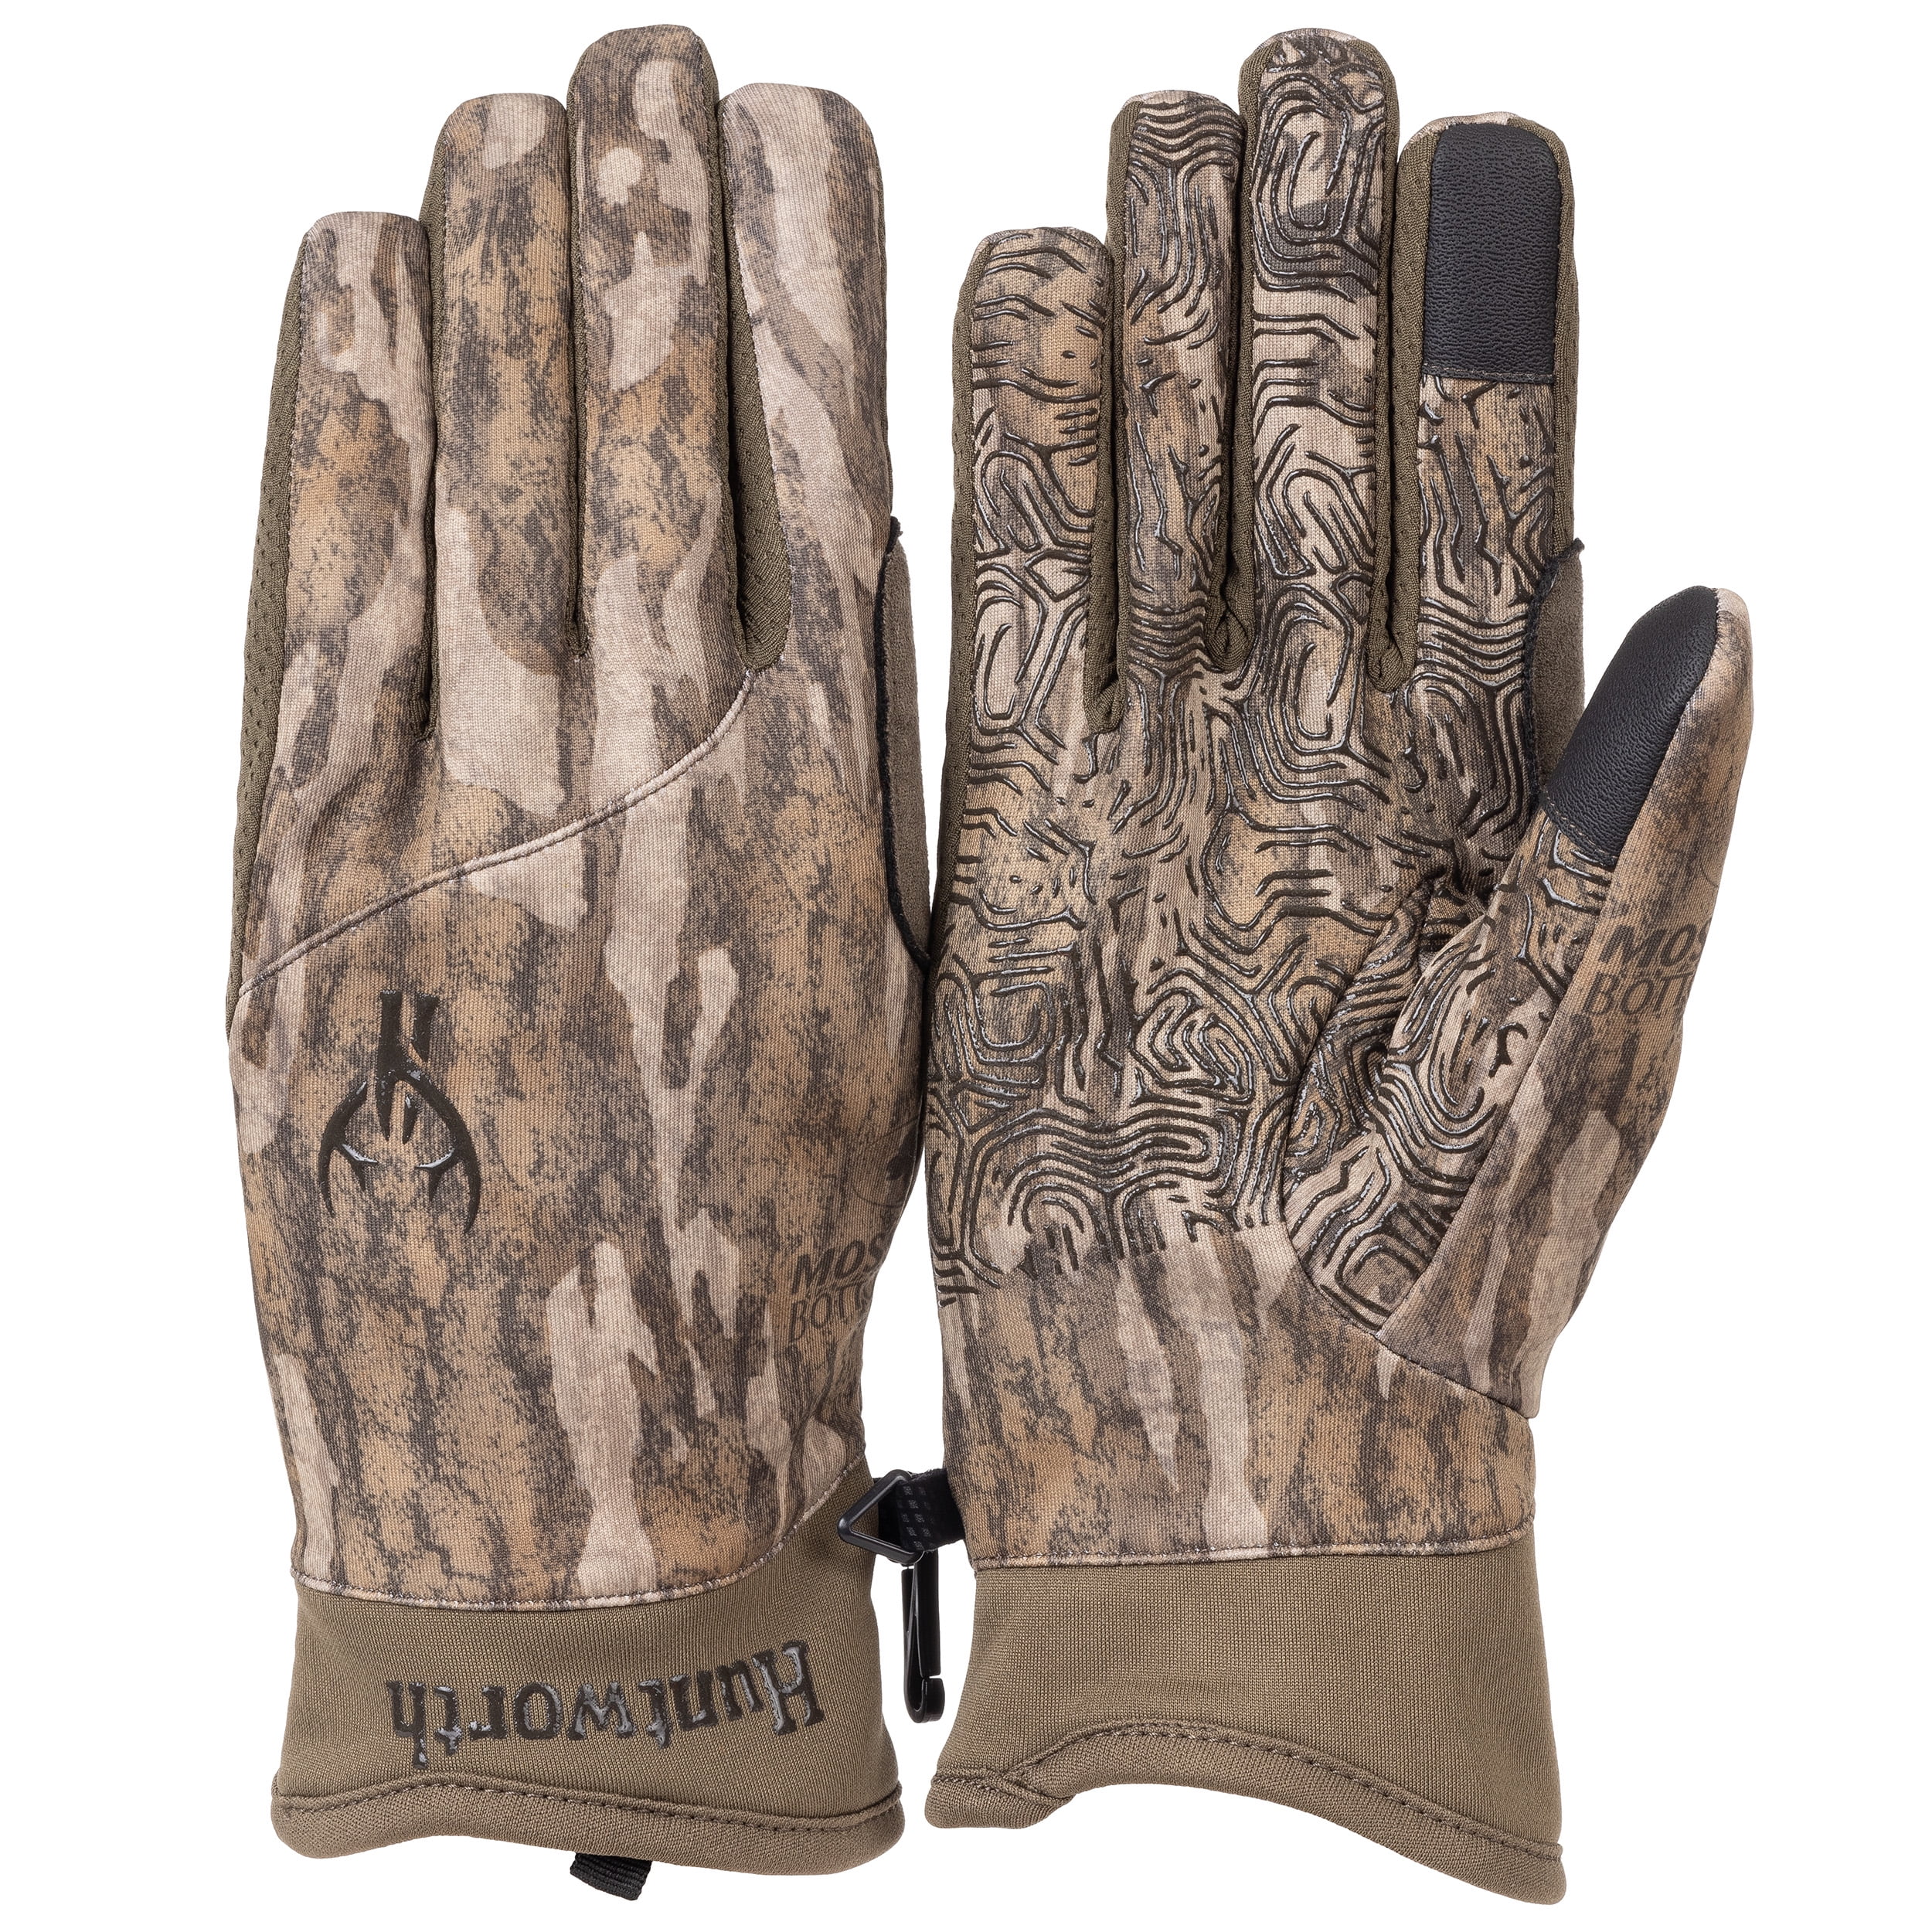 Huntworth Men's Gunner Midweight Hunting Gloves Mossy Oak Bottomland, Size M/L, Size: One size, Brown